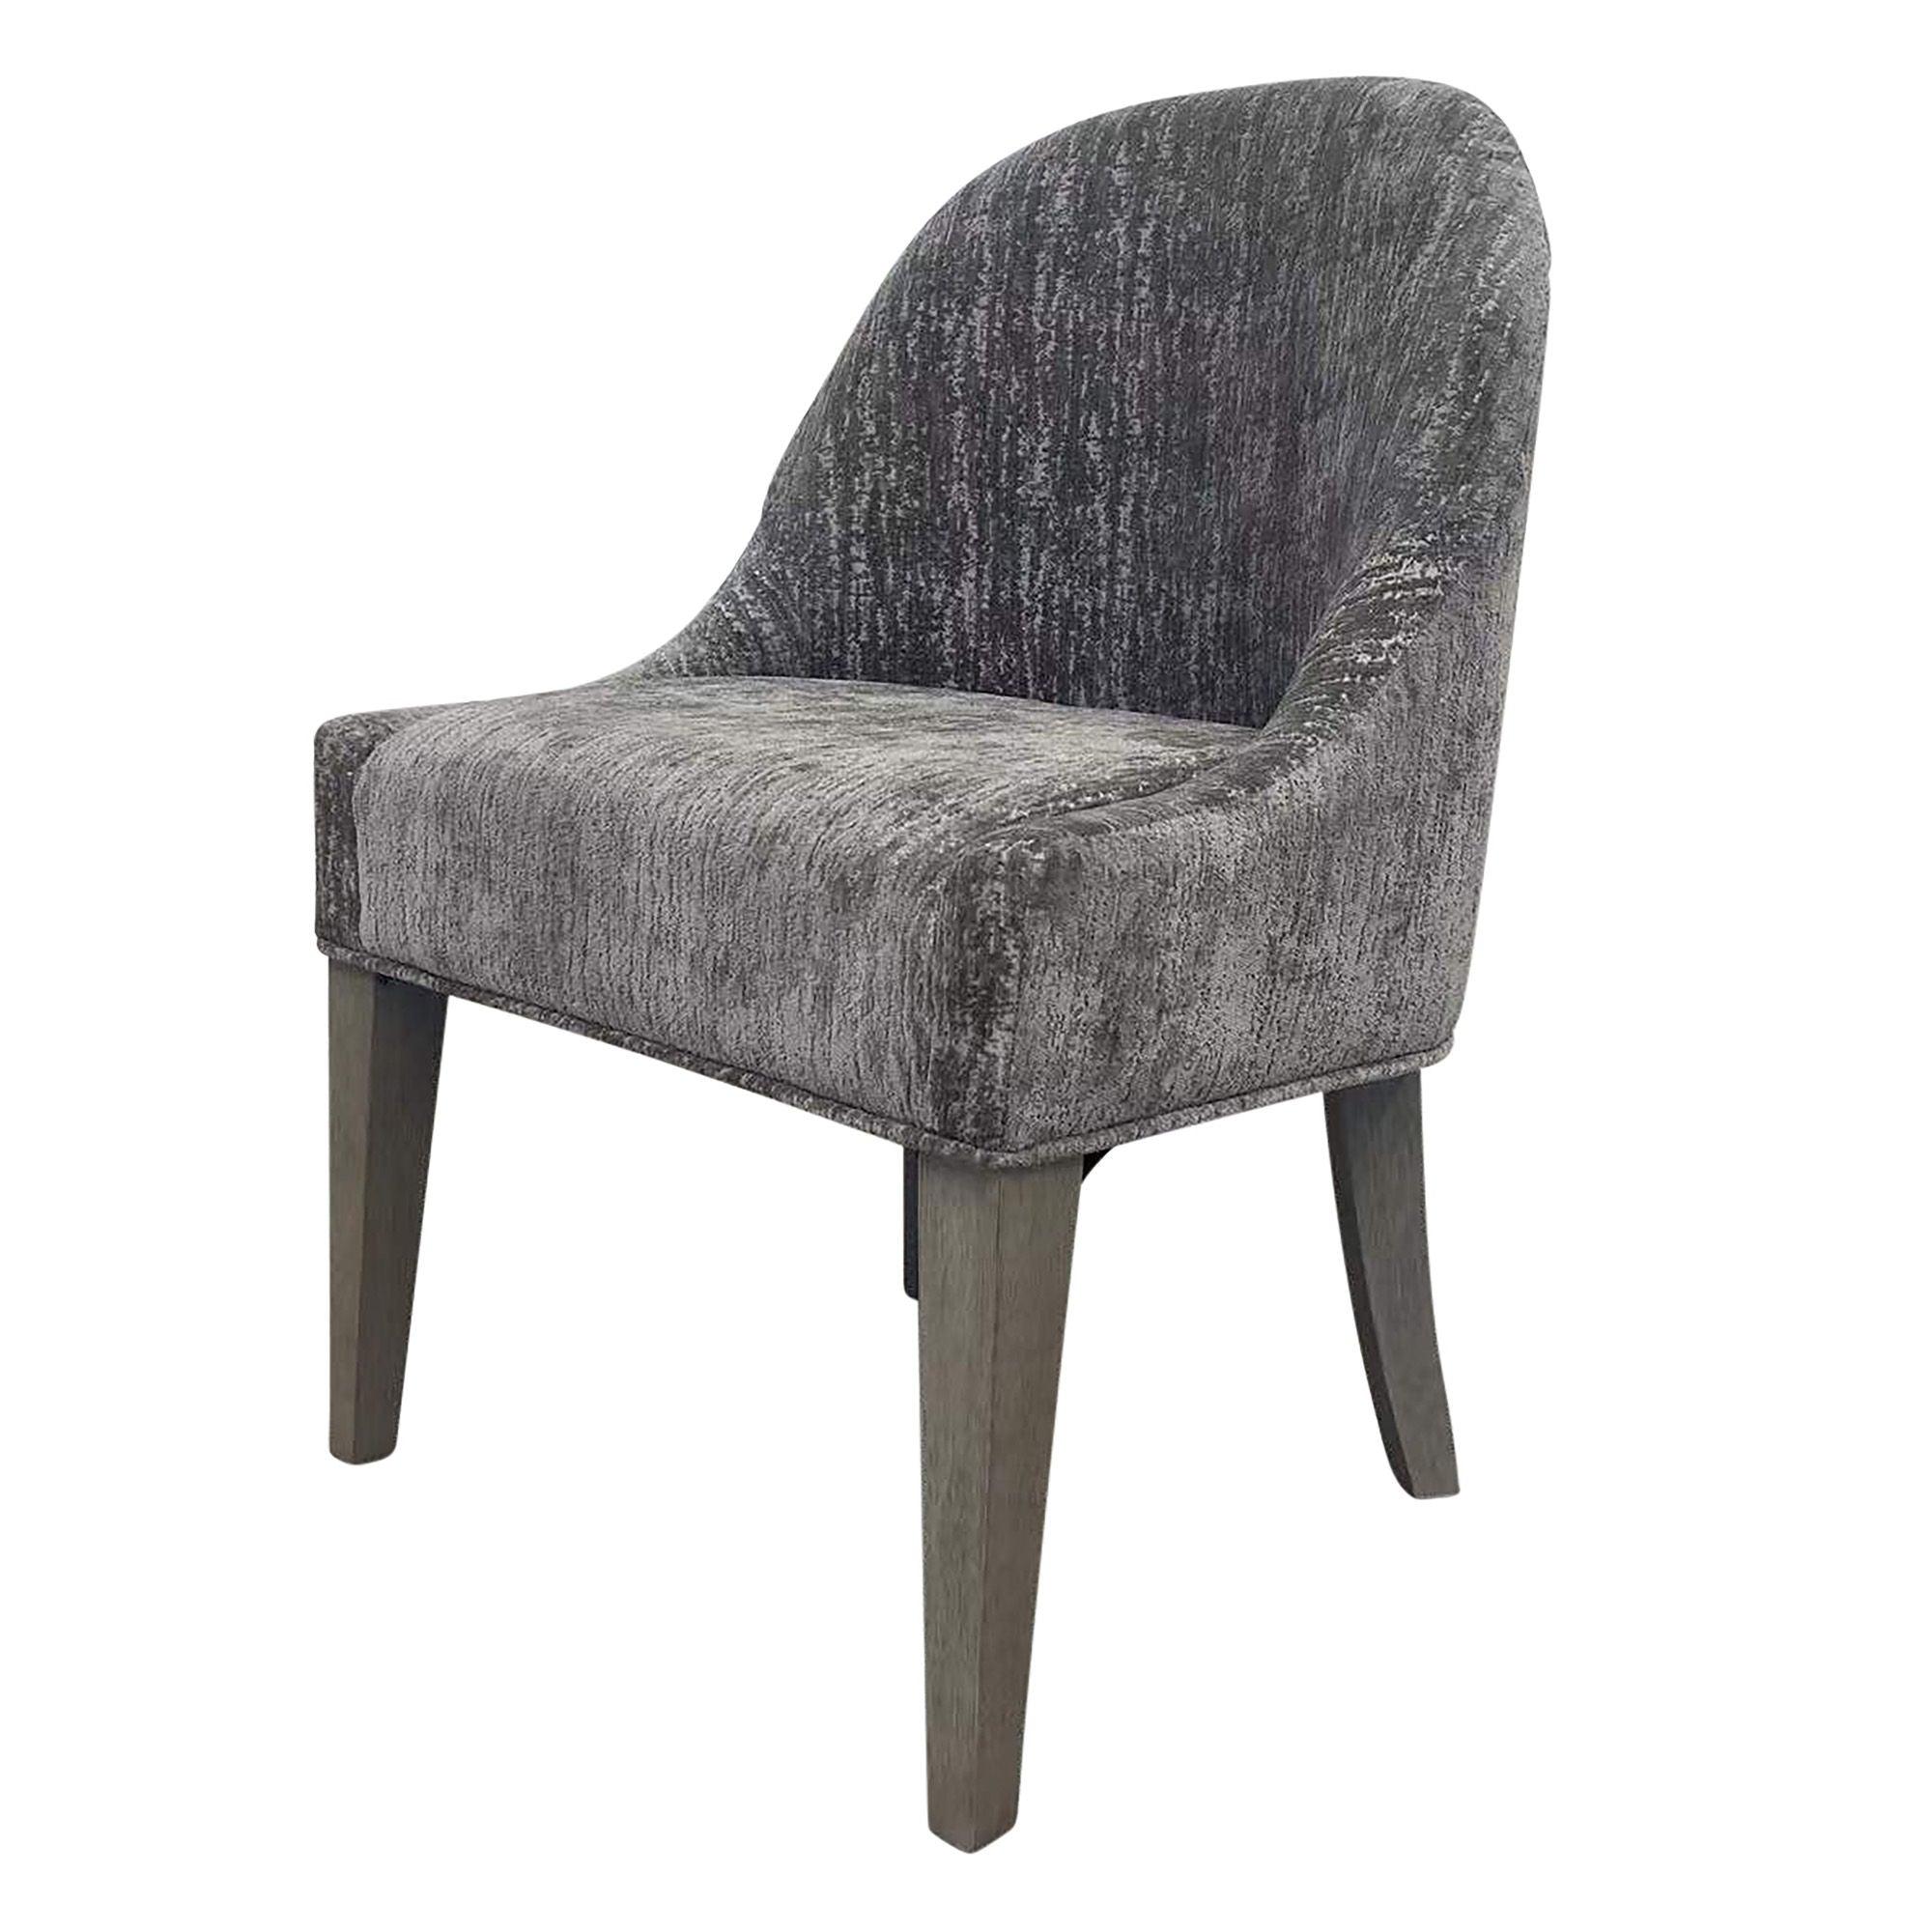 Parker House - Pure Modern Dining - Upholstered Armless Side Chair - Moonstone - 5th Avenue Furniture